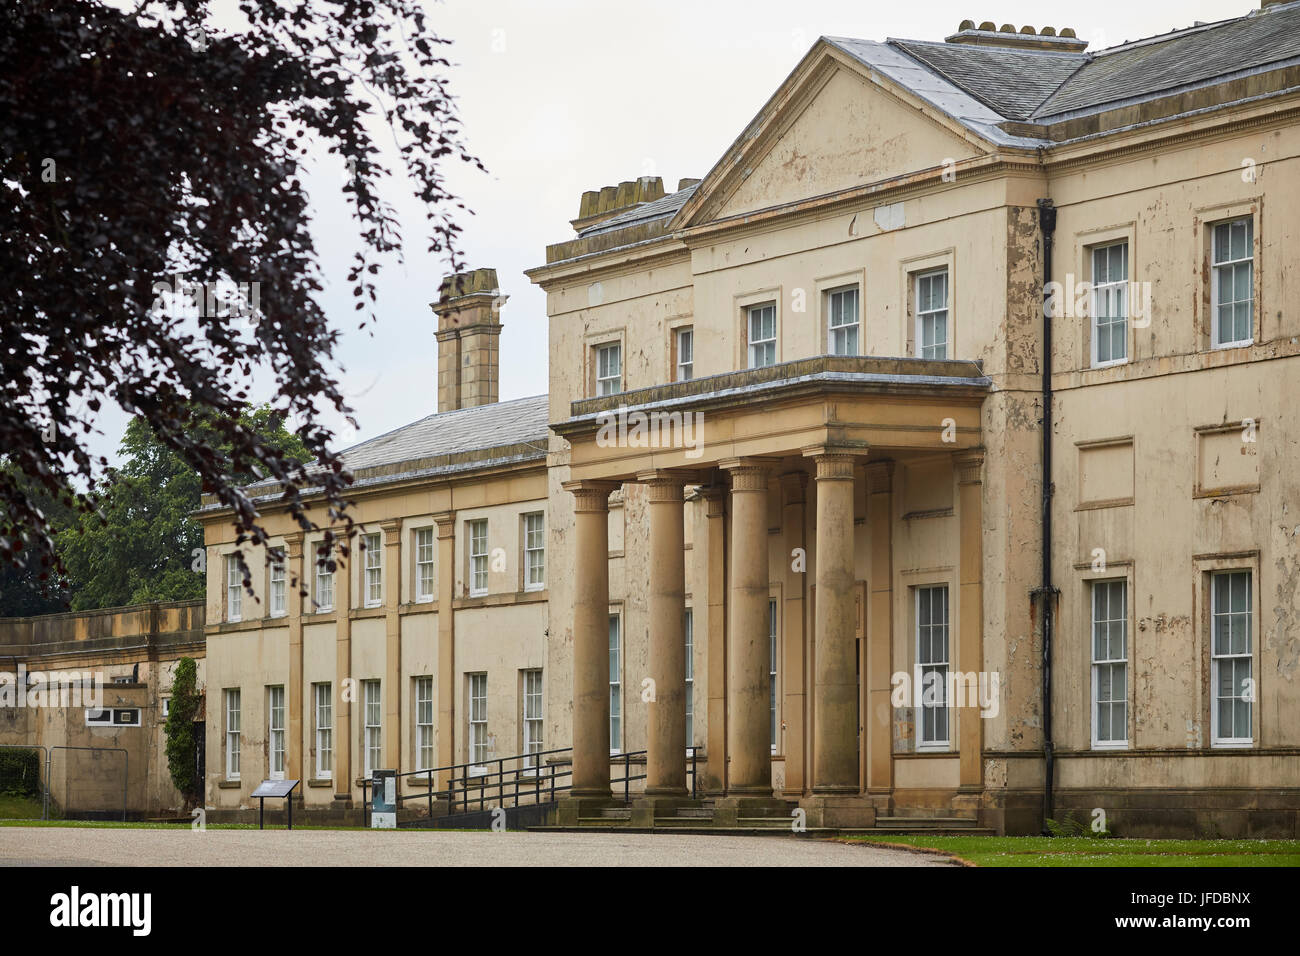 Manchester City Council's Grade I listed, neoclassical 18th century country house sandstone Heaton Hall, Heaton Park within a municipal park north of  Stock Photo